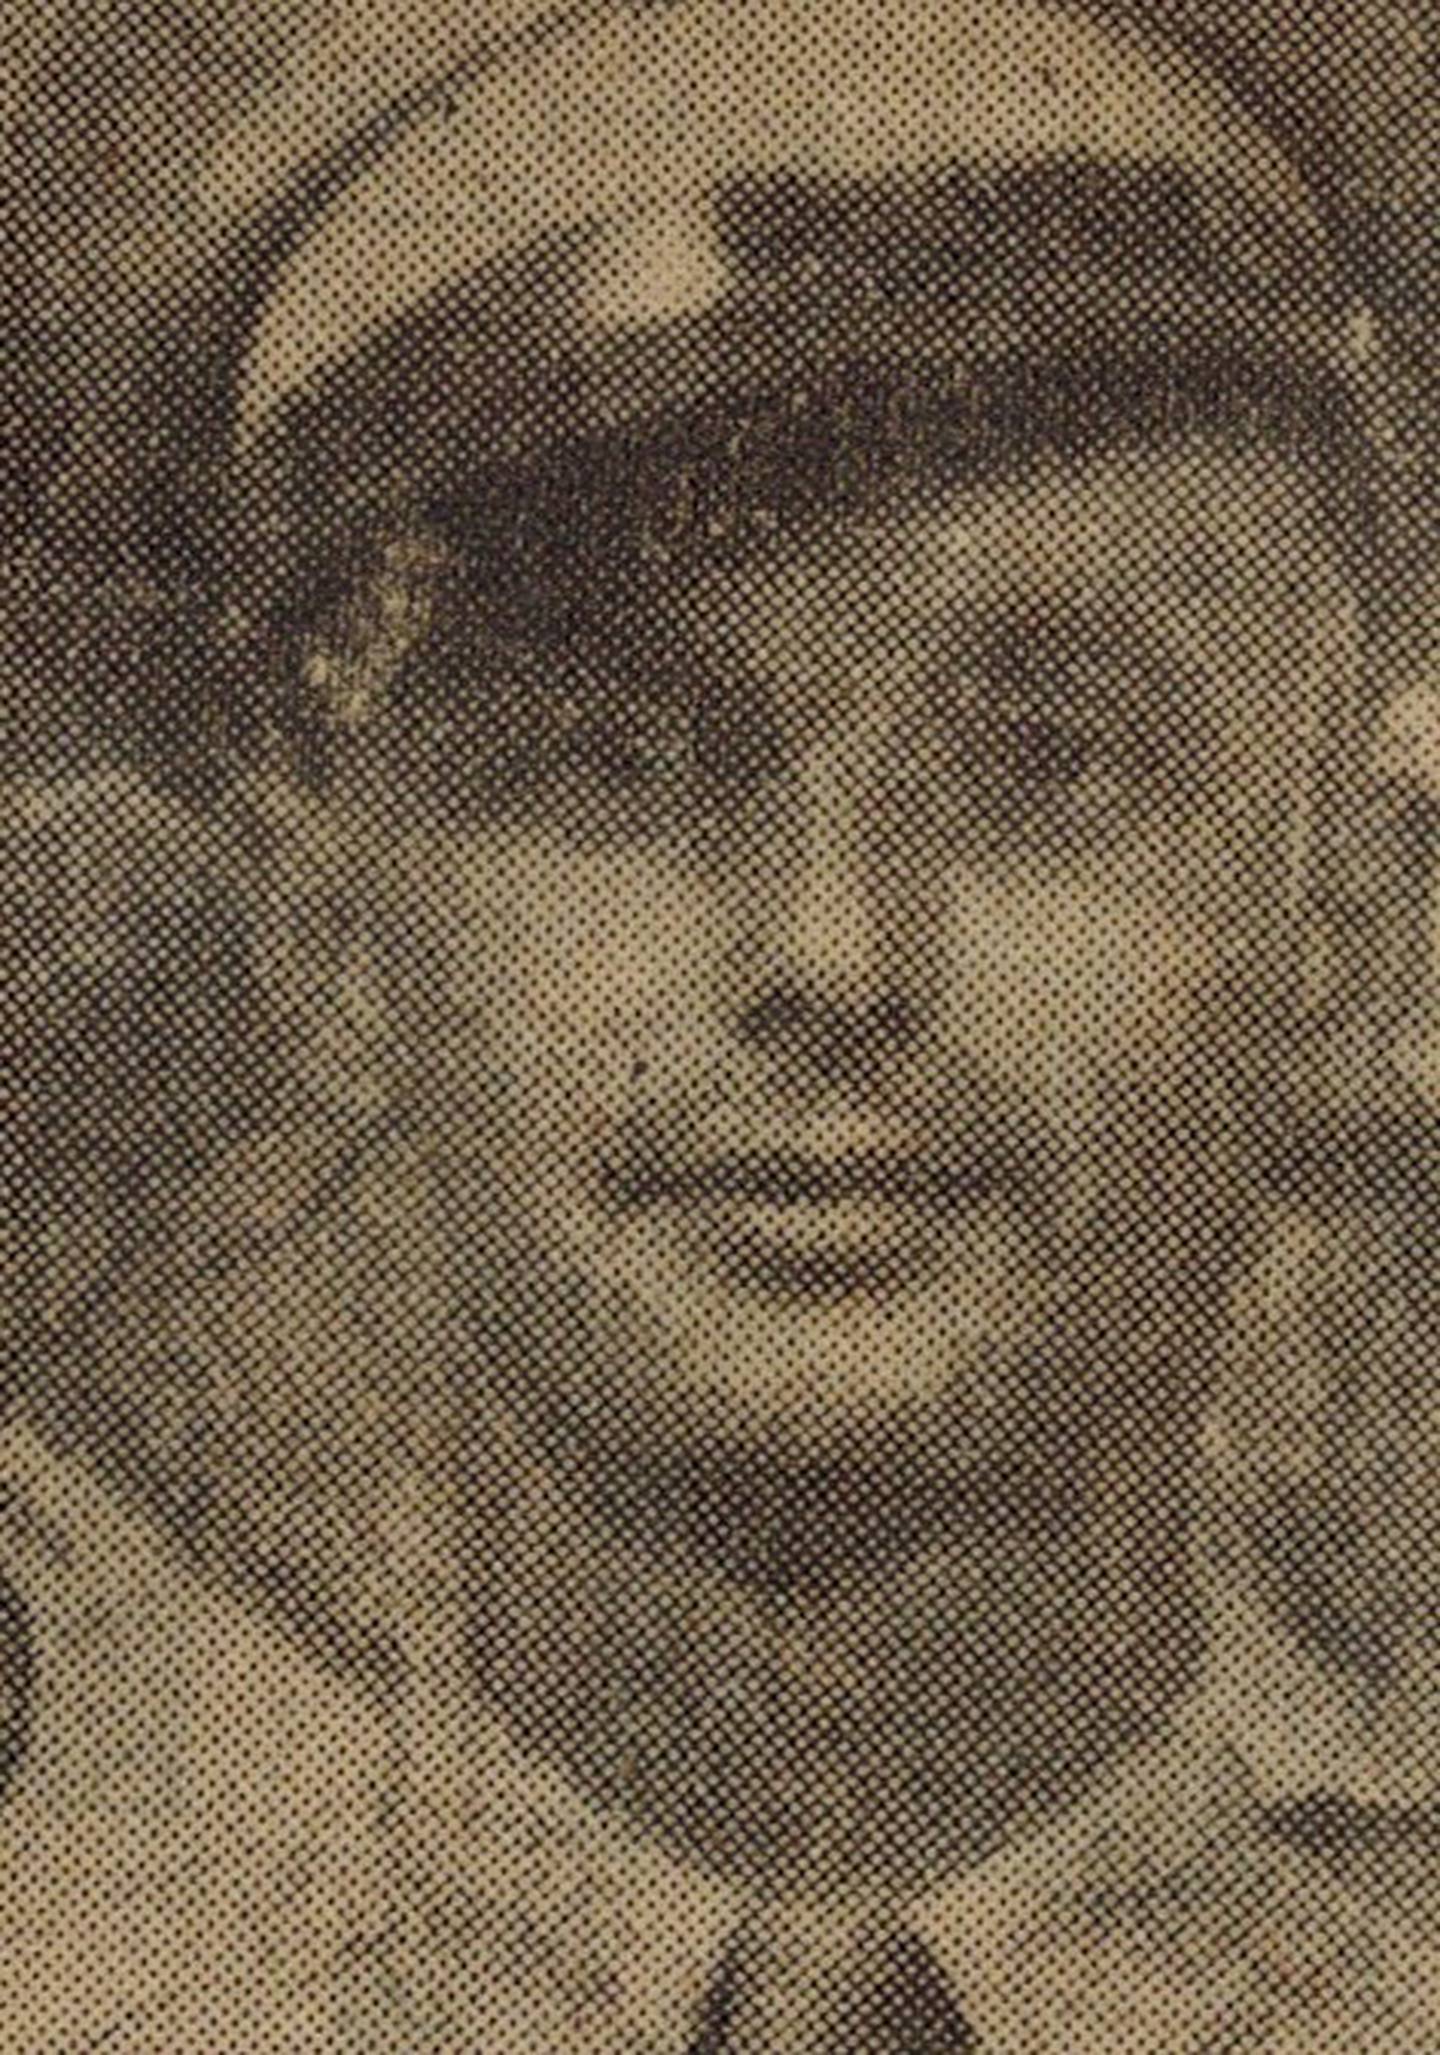 David Ceci of Joliet was one of five Joliet brothers who served in the Army during World War II. David was wounded in action when he was 30. This photo of him ran in The Herald-News, according to his son Robert Ceci of Joliet.